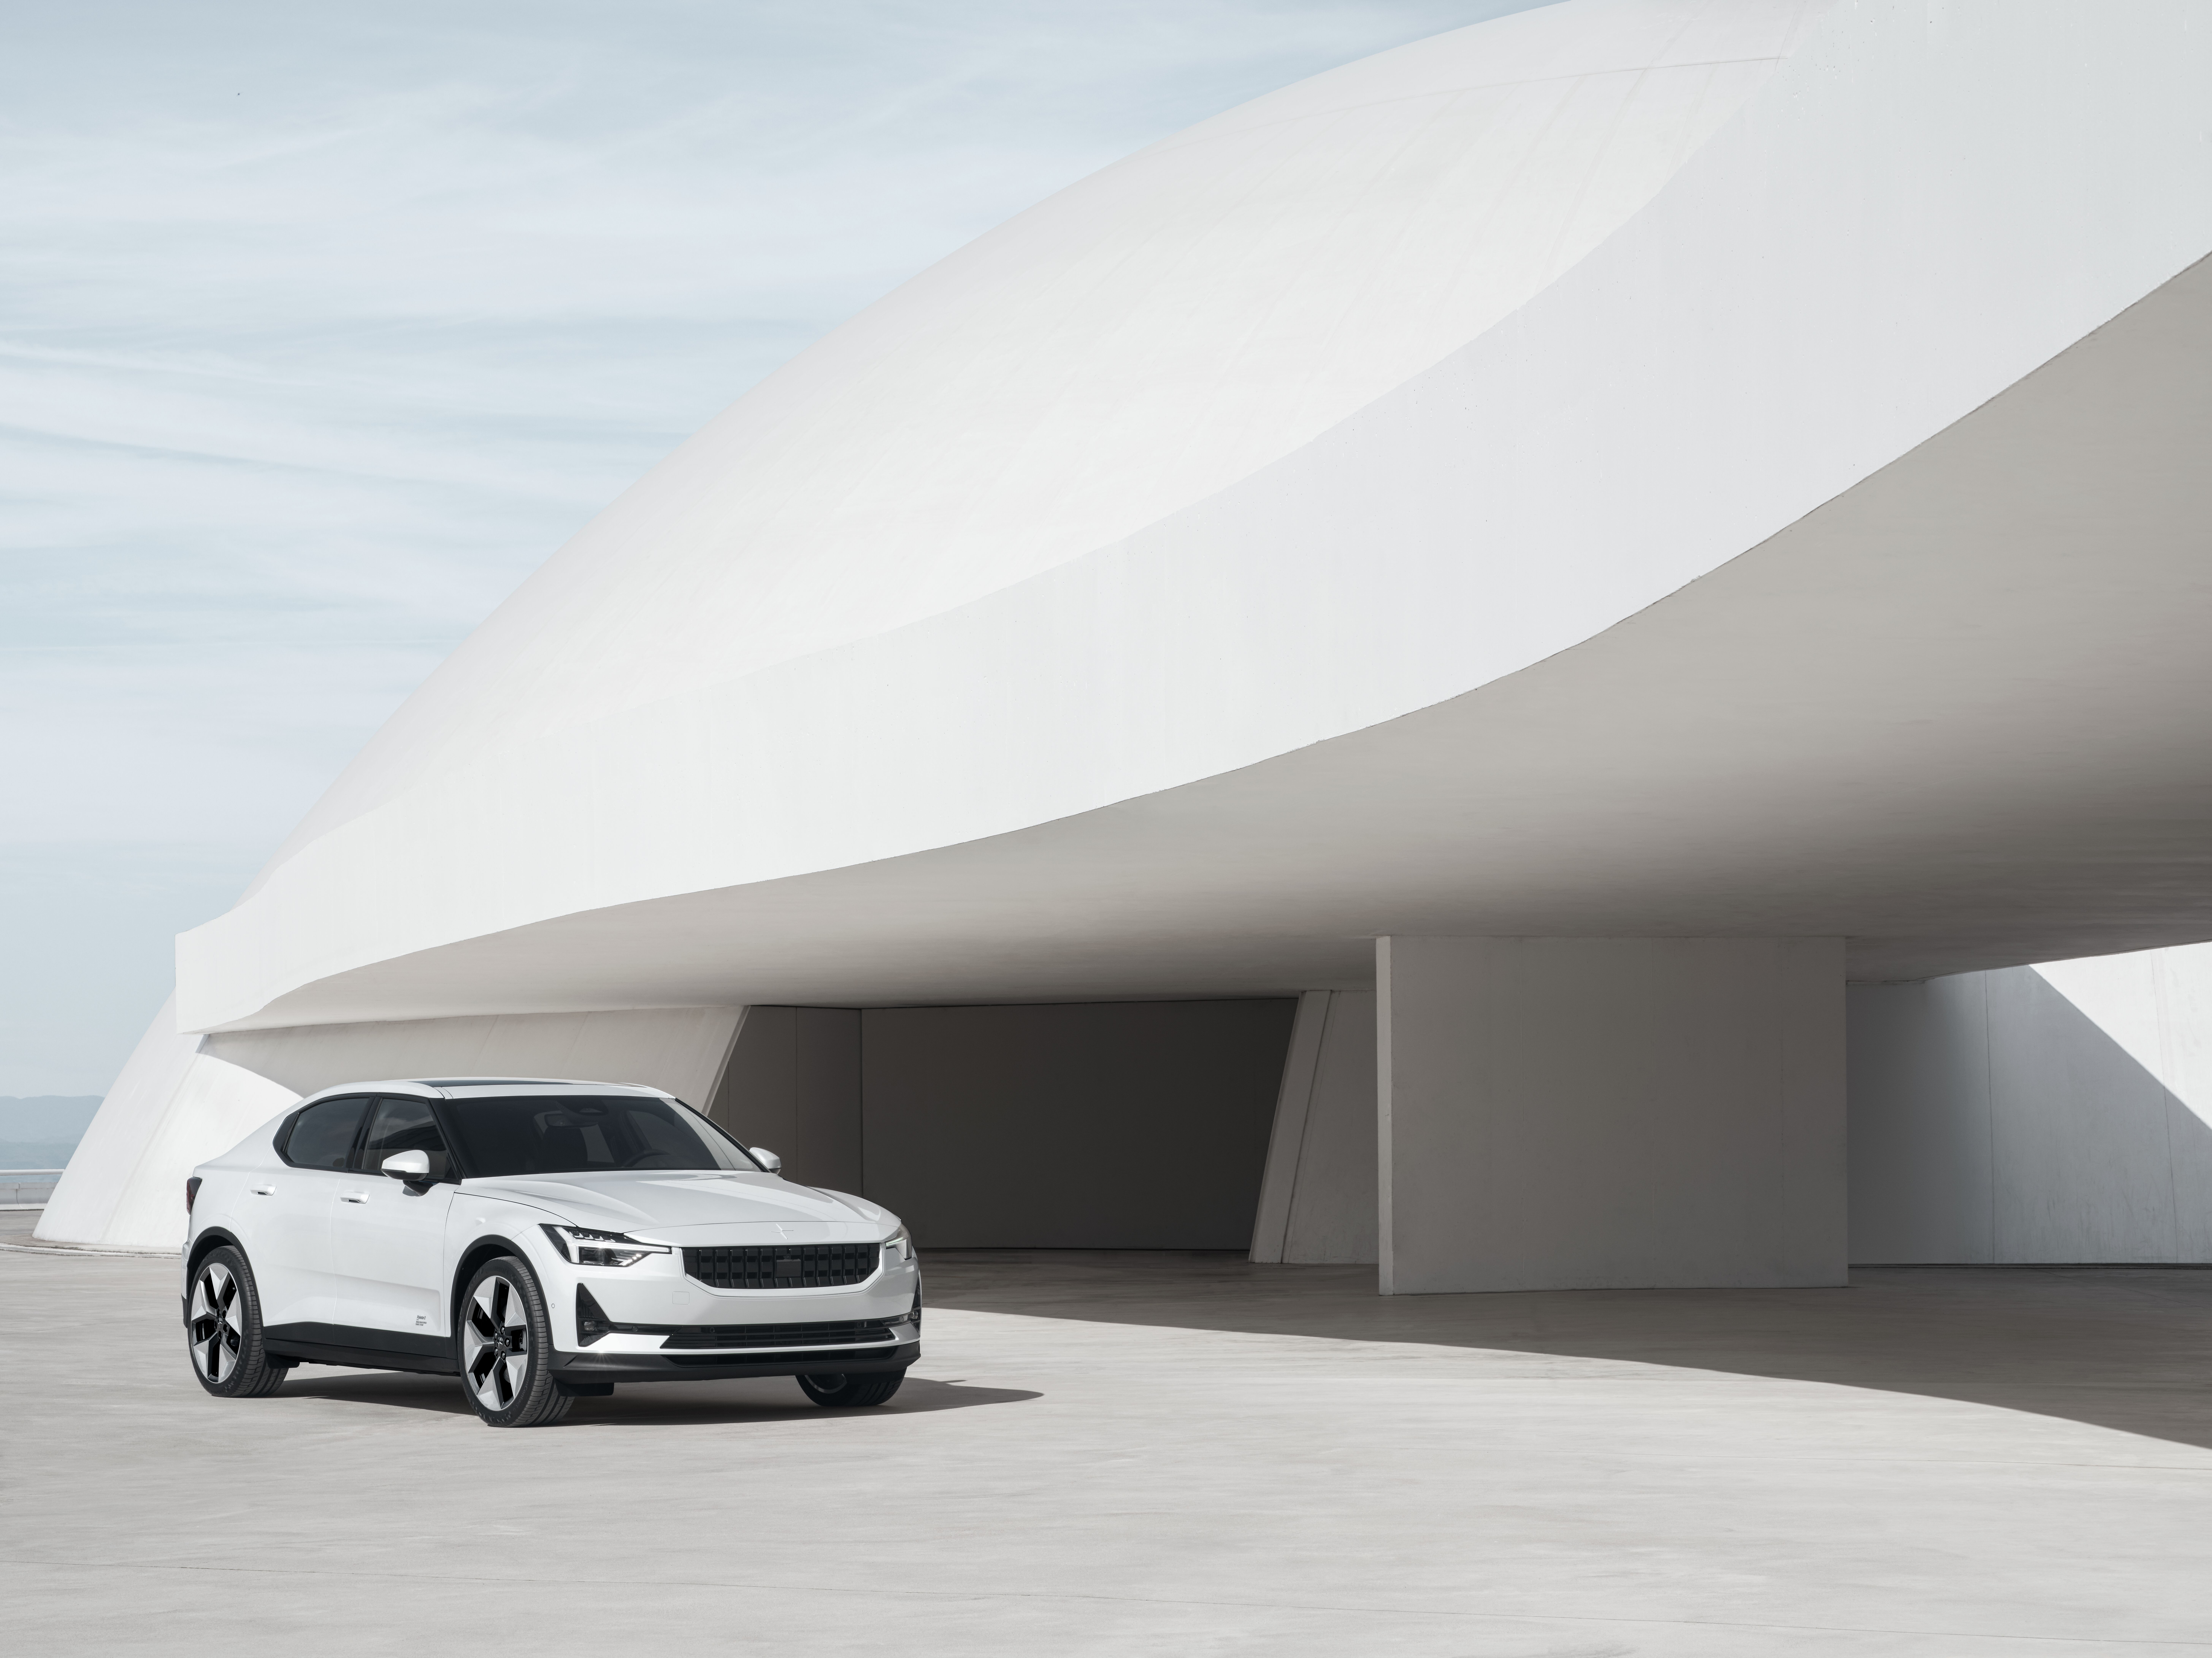 The Volvo’s Polestar 2 EV, Refreshed for Greater Sustainability